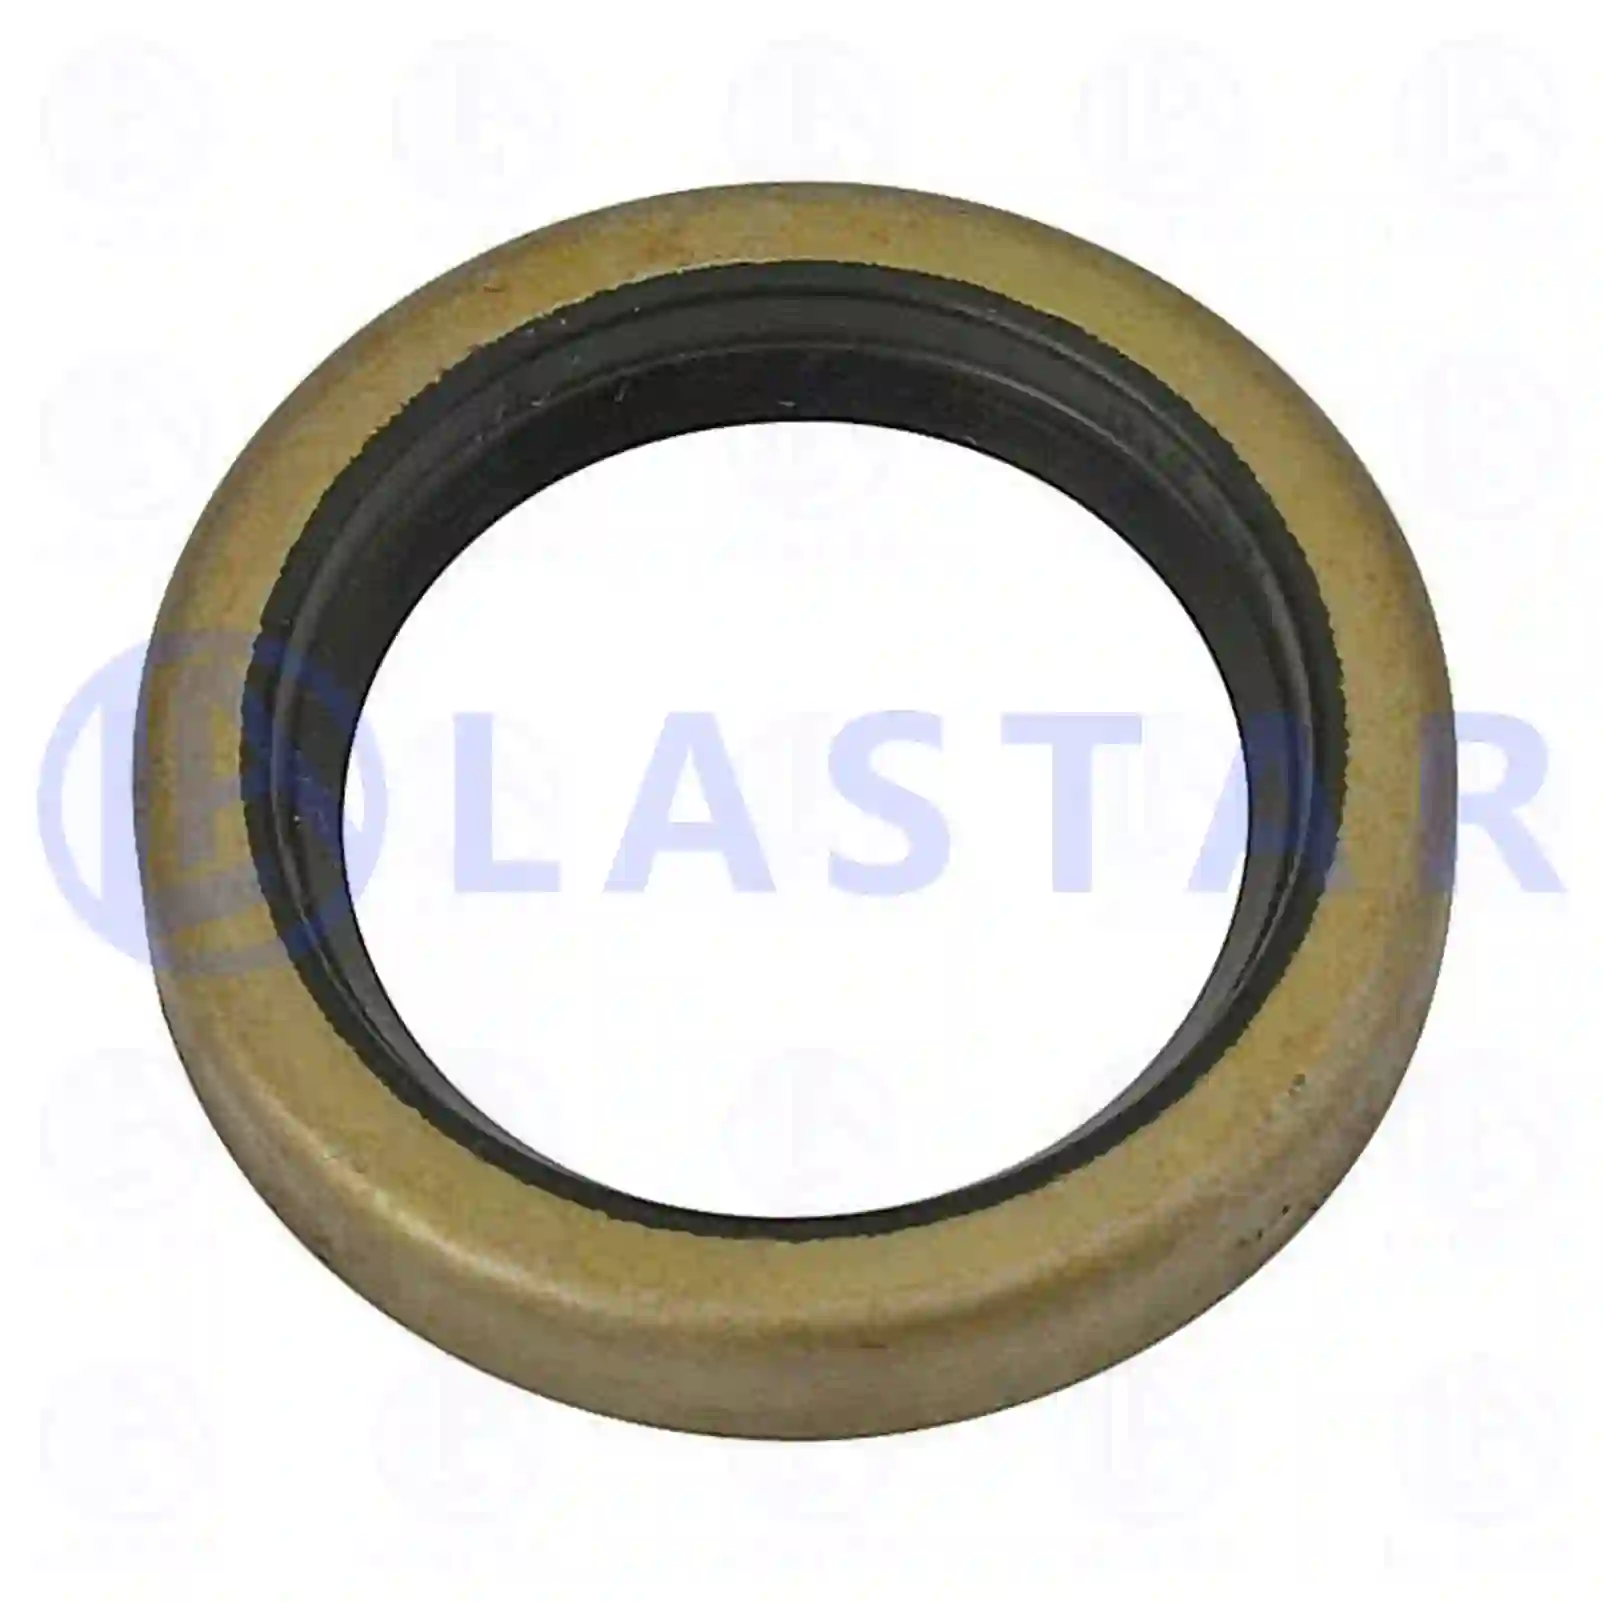 Oil seal, 77731947, 0140335, 140335, 0069974946, 6876142 ||  77731947 Lastar Spare Part | Truck Spare Parts, Auotomotive Spare Parts Oil seal, 77731947, 0140335, 140335, 0069974946, 6876142 ||  77731947 Lastar Spare Part | Truck Spare Parts, Auotomotive Spare Parts